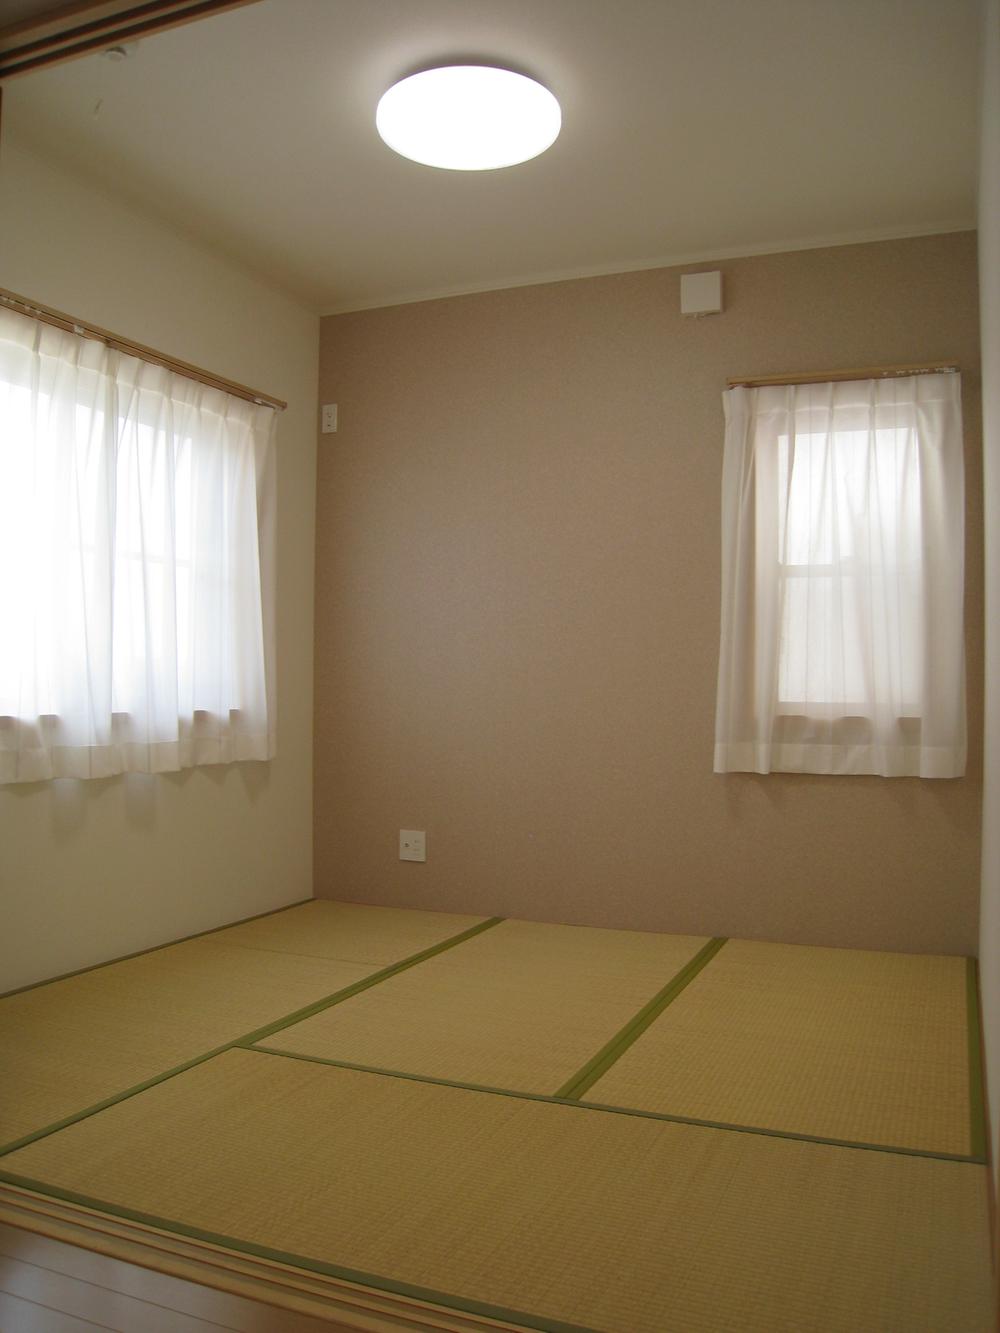 Non-living room. Japanese-style room to settle down and relieved